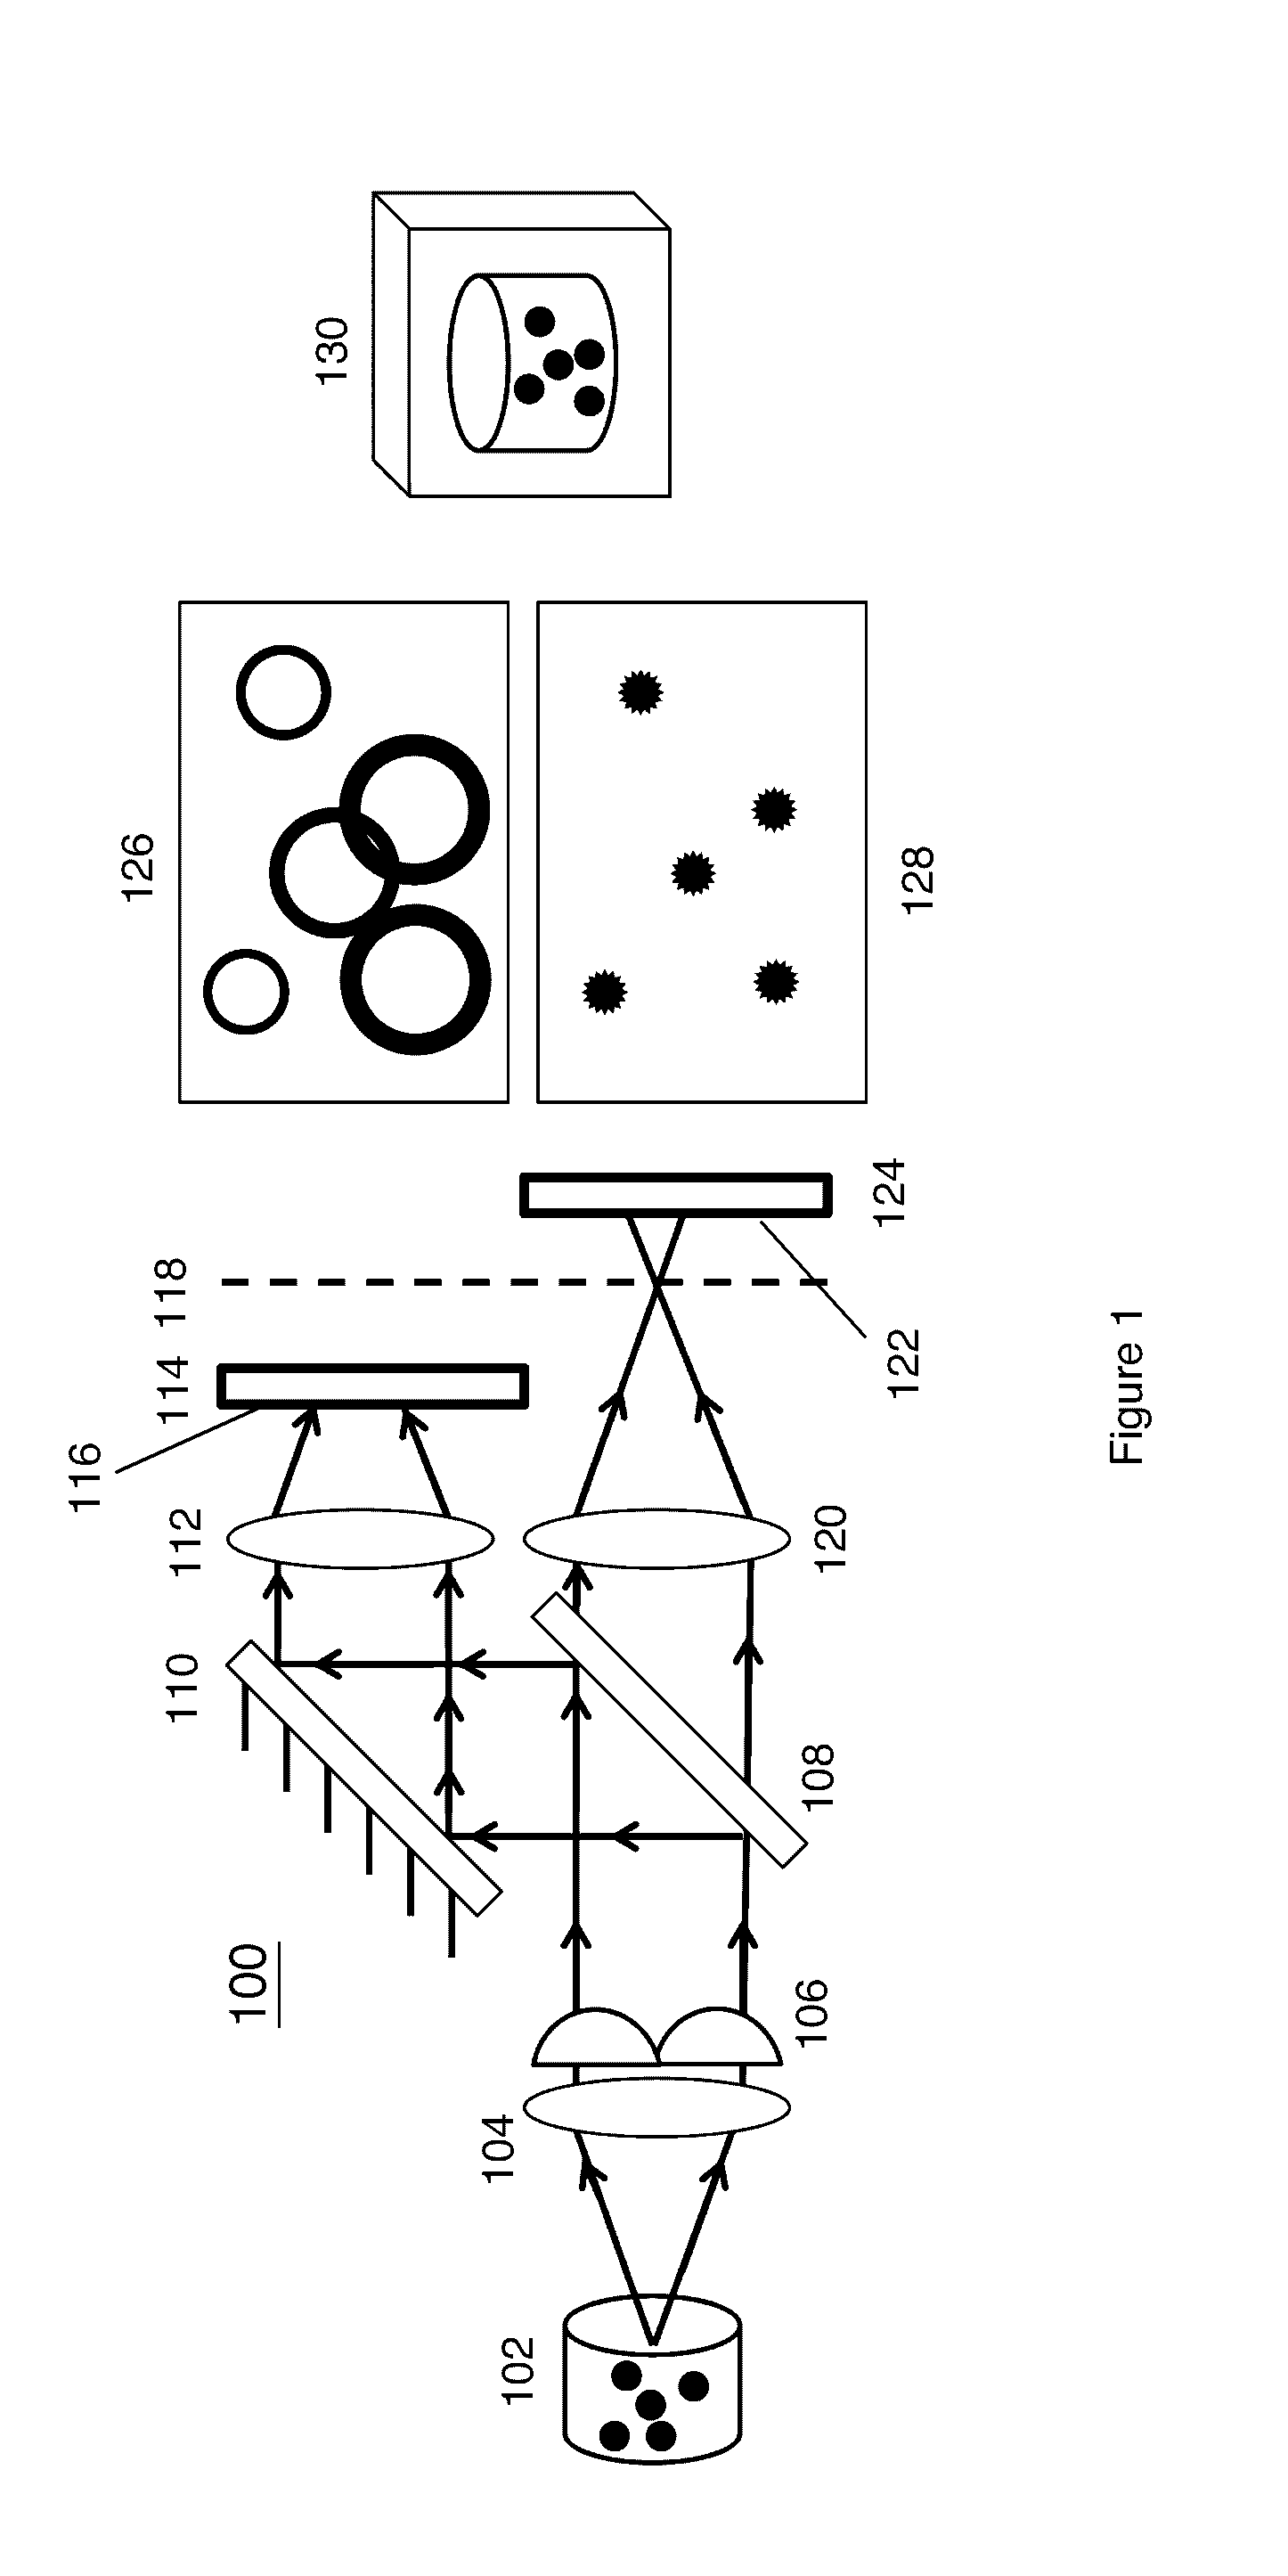 Engineered Point Spread Function for Simultaneous Extended Depth of Field and 3D Ranging